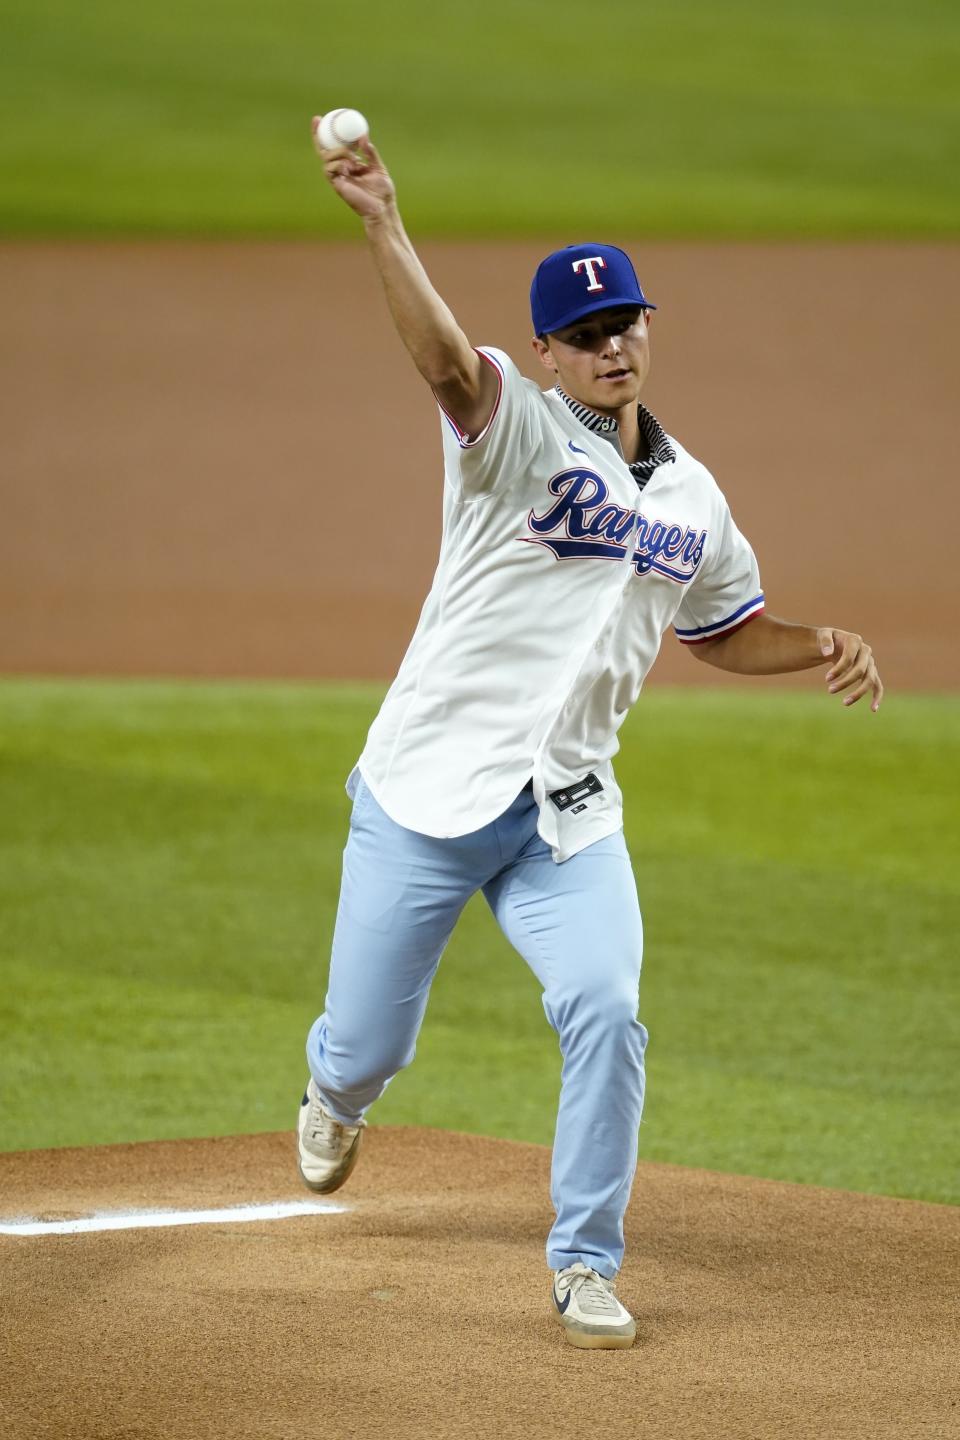 Texas Rangers first-round draft pick Jack Leiter throws out the ceremonial first pitch before the Rangers' baseball game against the Arizona Diamondbacks in Arlington, Texas, Wednesday, July 28, 2021. (AP Photo/Tony Gutierrez)